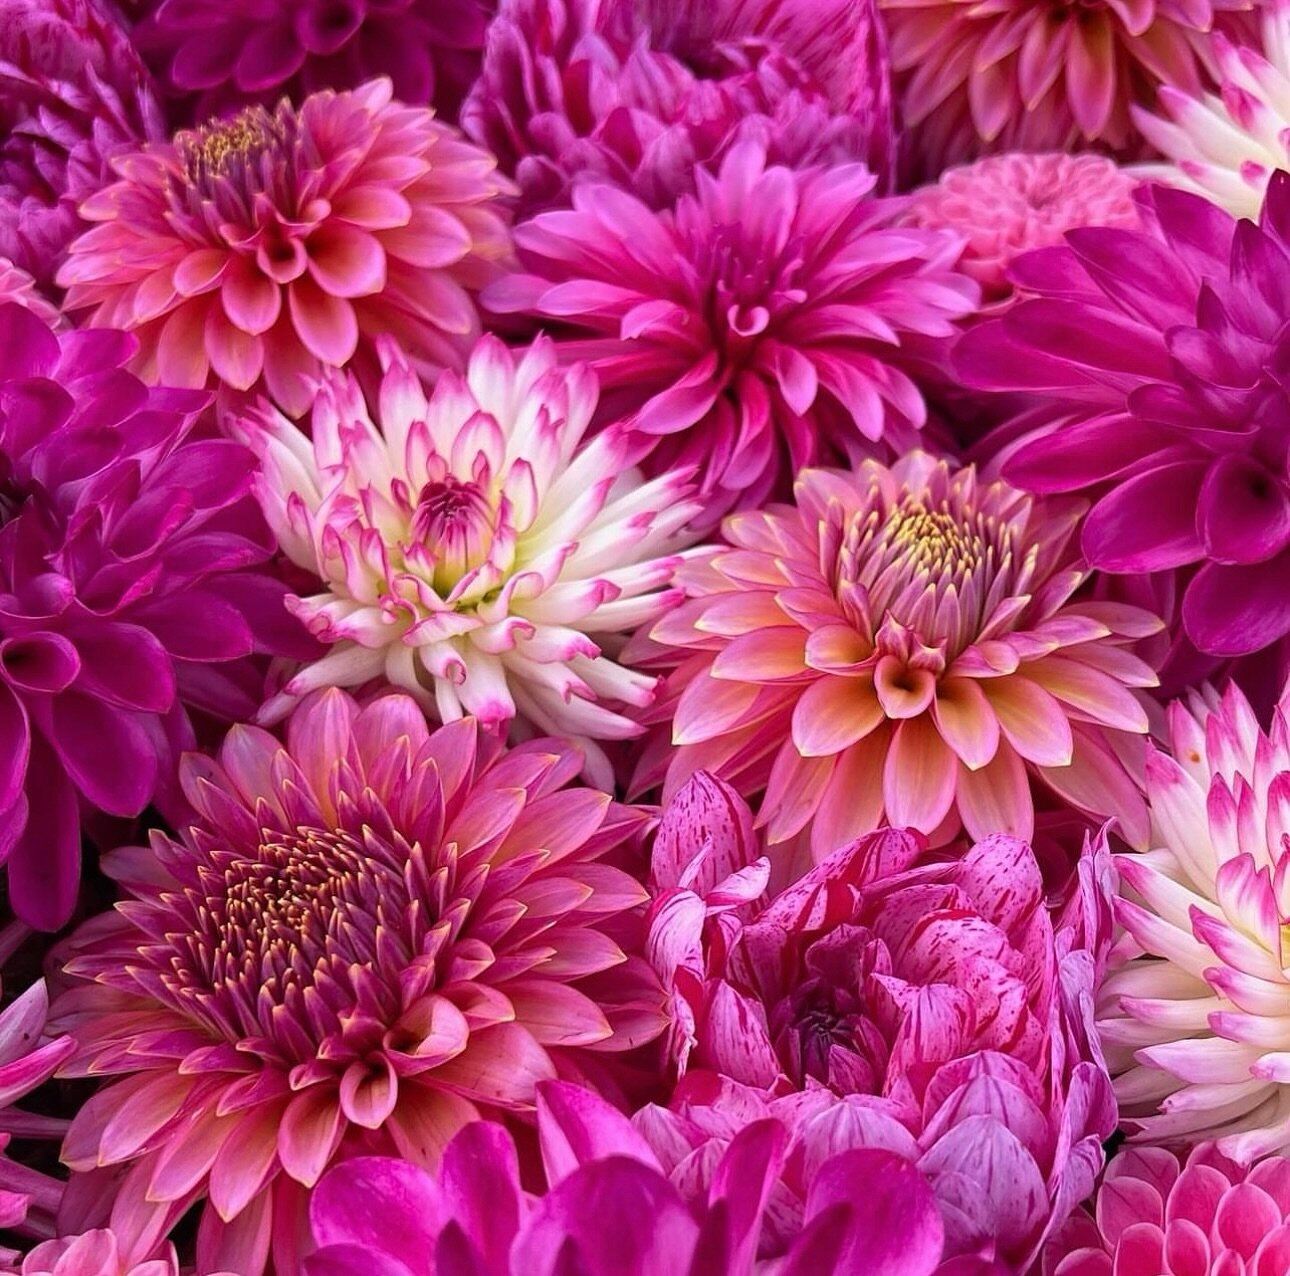 All the Hot Pink Dahlias!! 

It was great to learn about all of the opportunities @triplewrenfarms is creating to help dahlia hybridizers.  Tune in wherever you listen to podcasts!! 🥰

#dahlia #dahliabreeding #triplewrenfarms #theflowerpodcast #gard